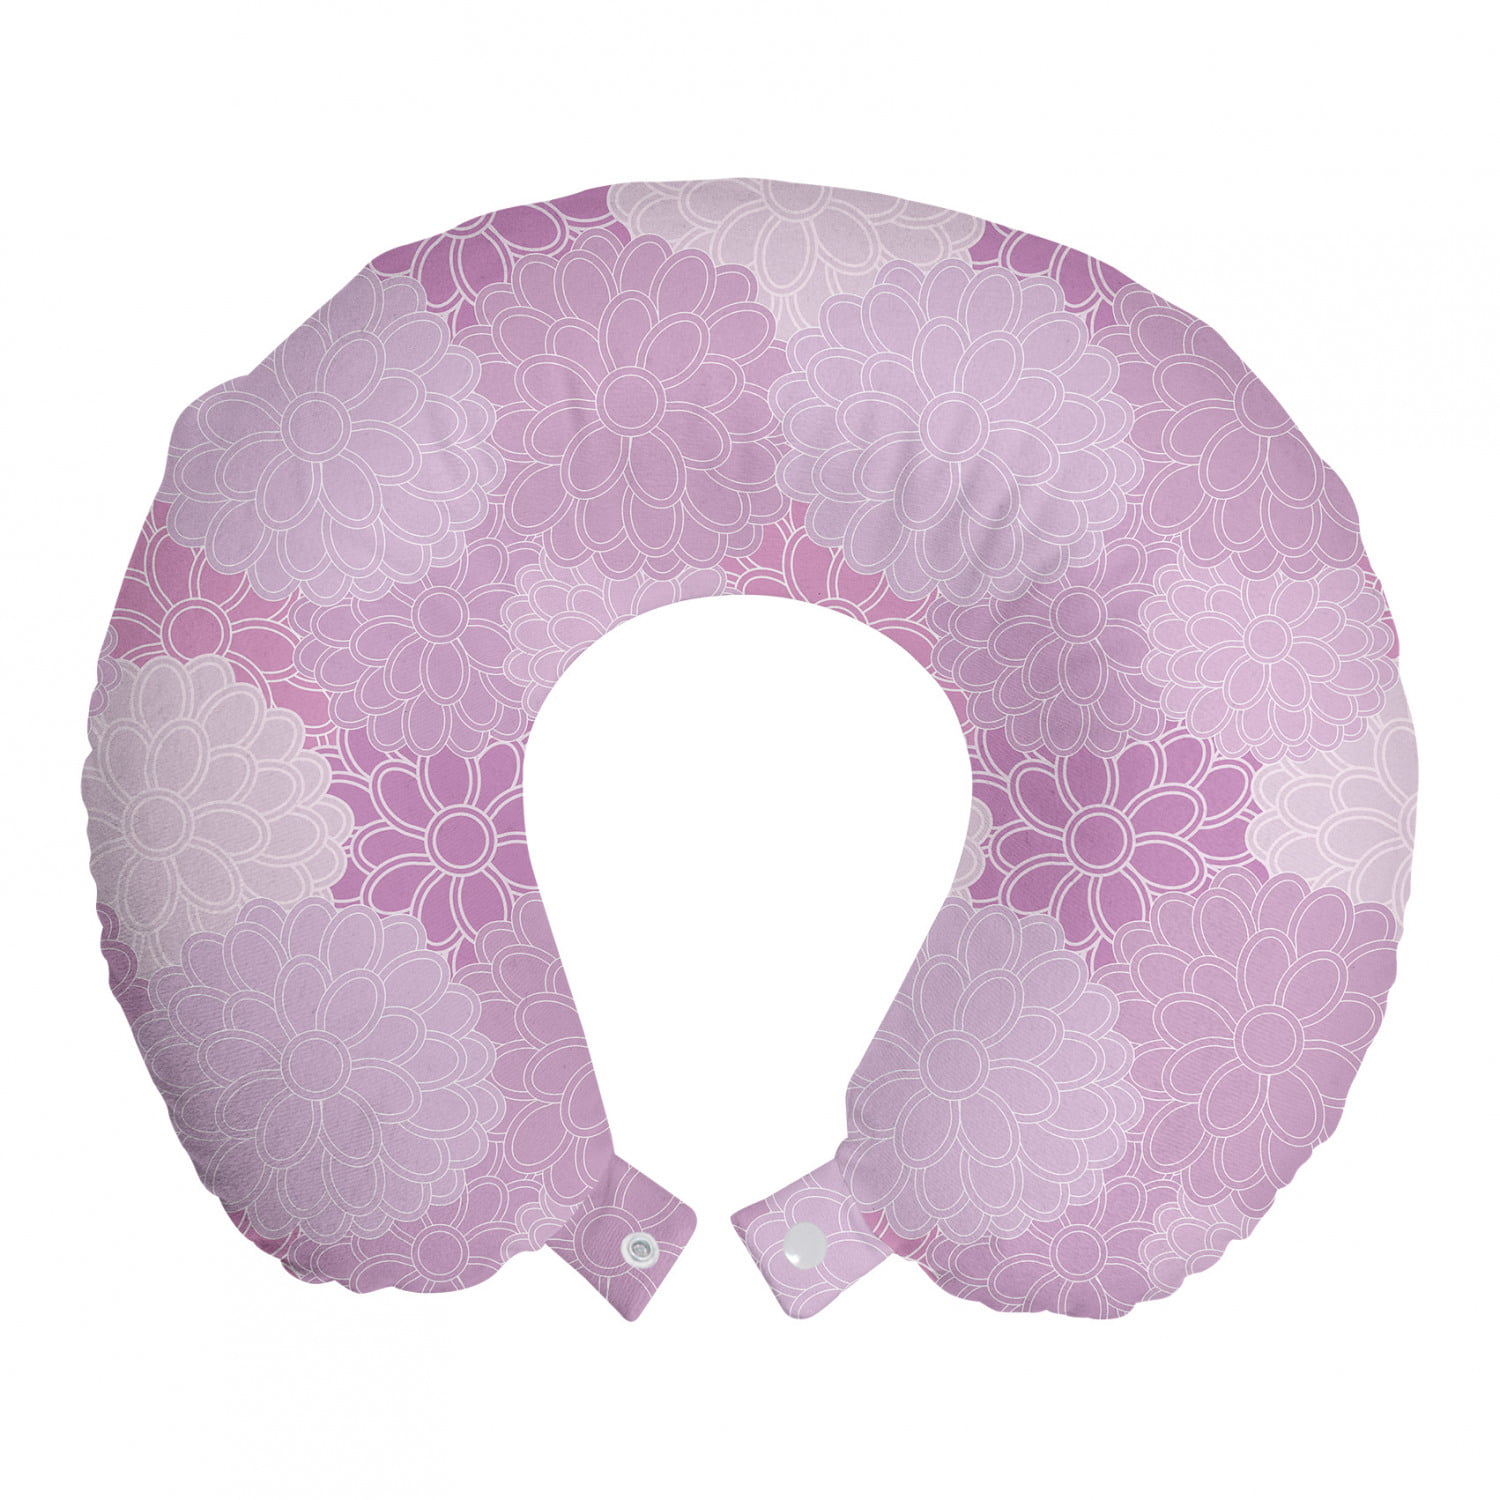 Memory Foam Traveling Accessory for Airplane and Car Ambesonne Floral Travel Pillow Neck Rest Dahlia Petals Blossoming Perennial Spring Flowers Rural Flourish Pattern 12 Baby Pink Pale Mauve